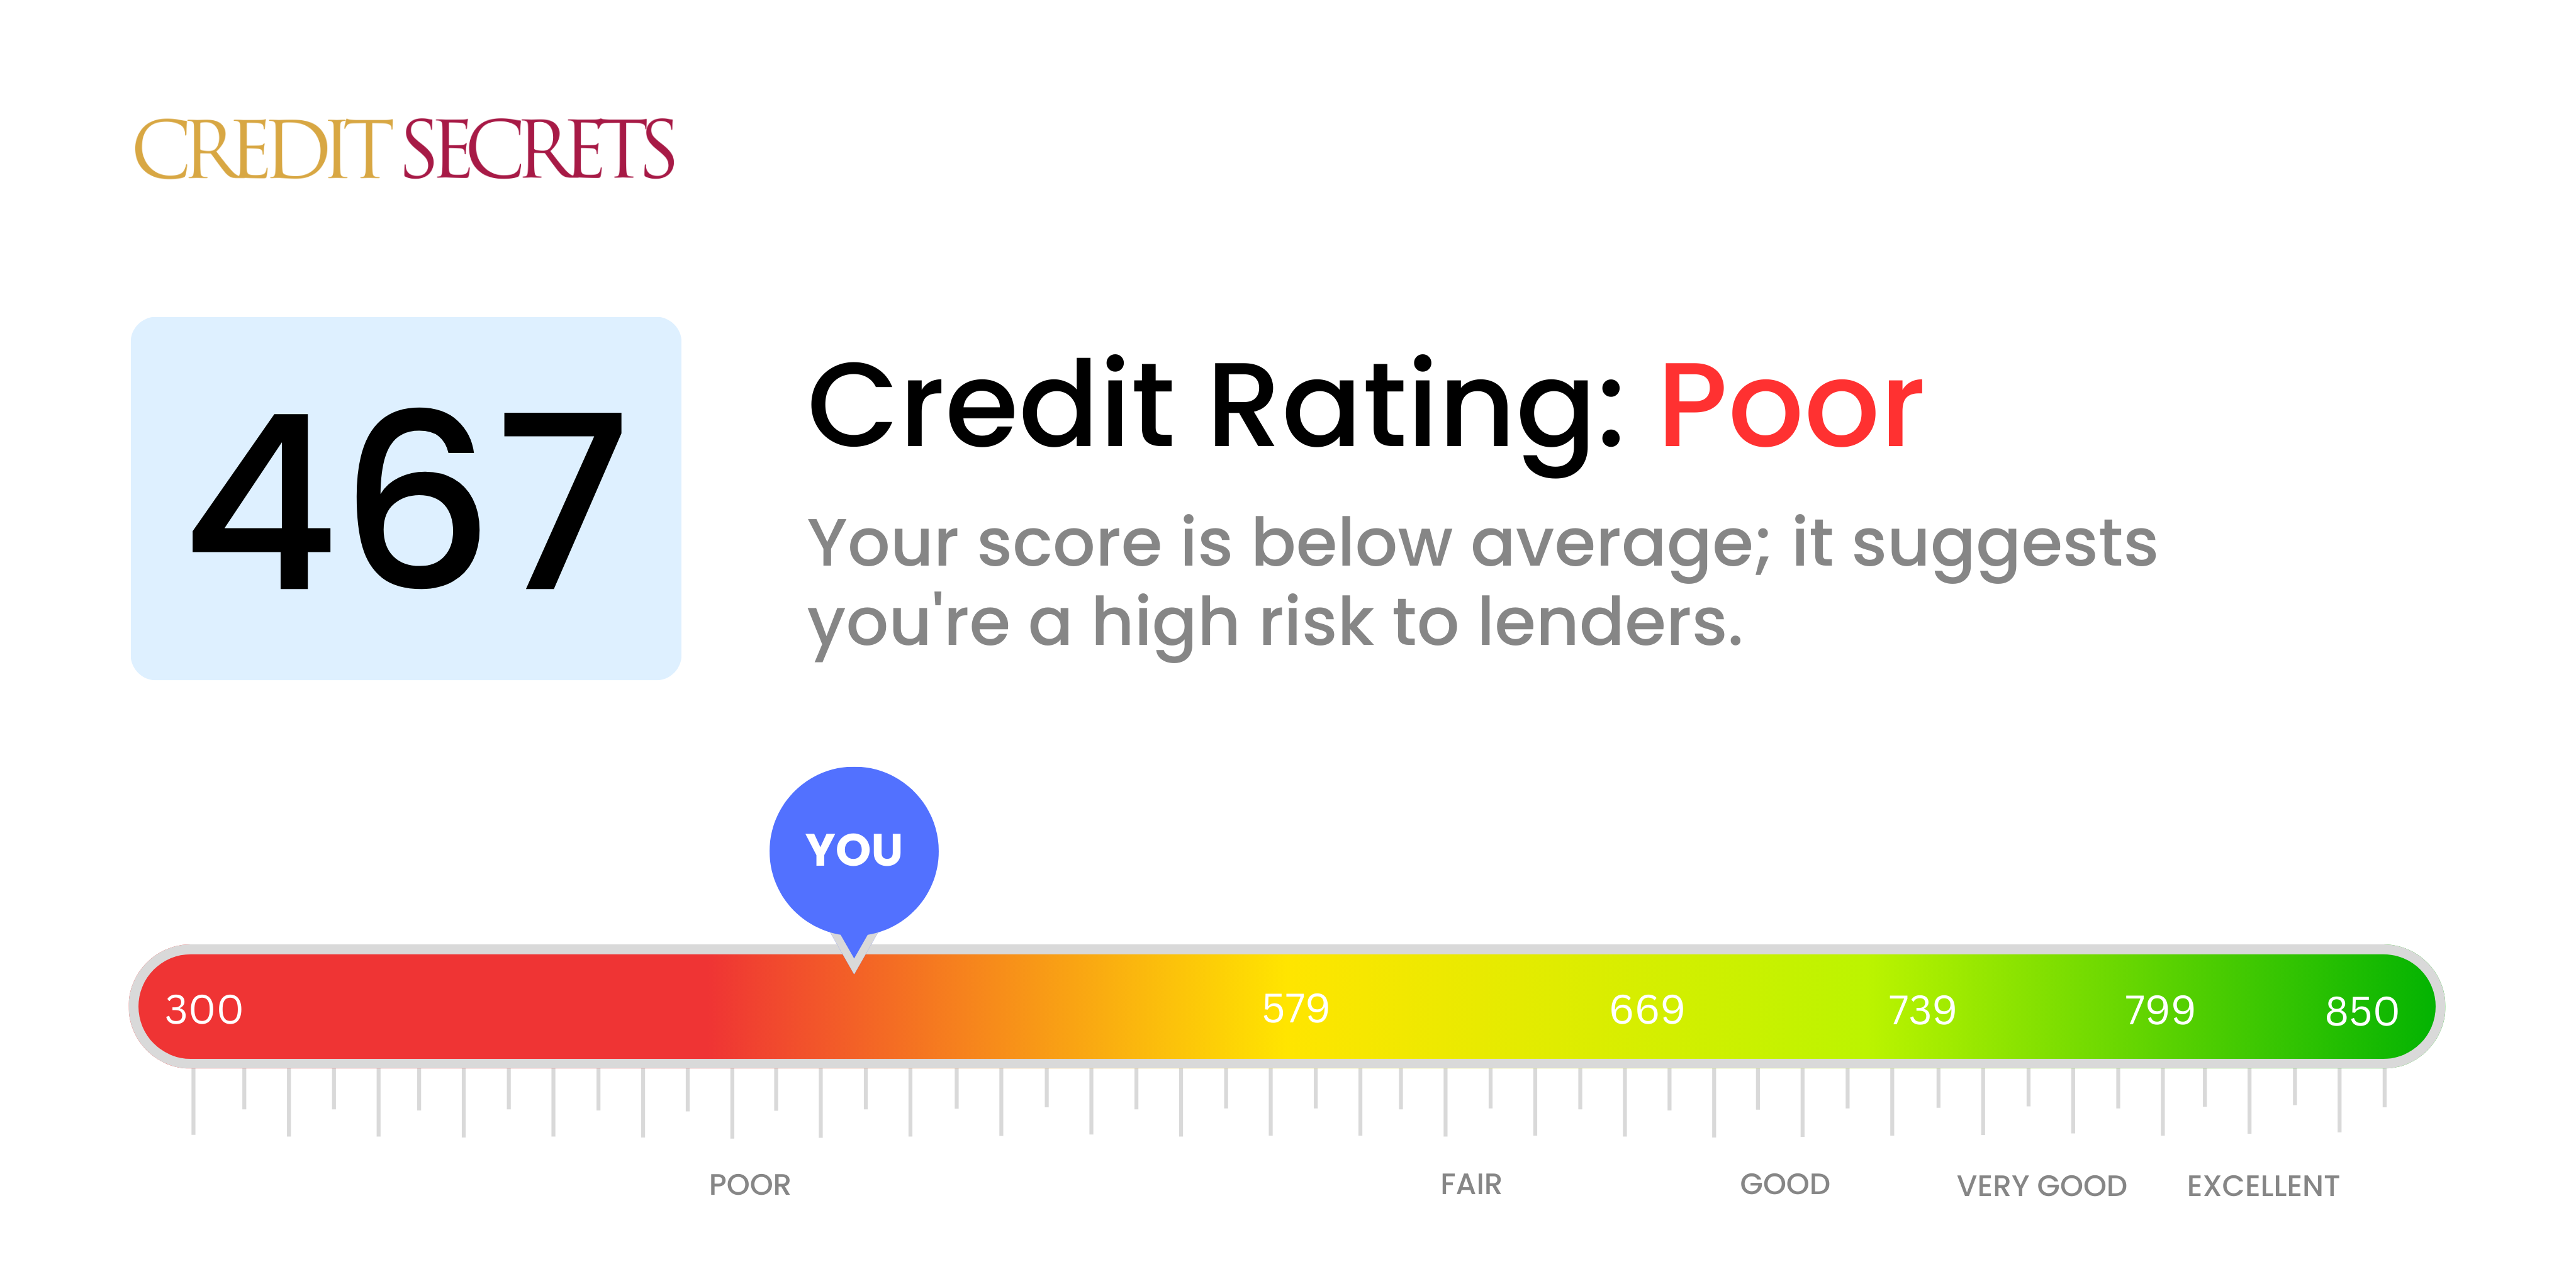 Is 467 a good credit score?